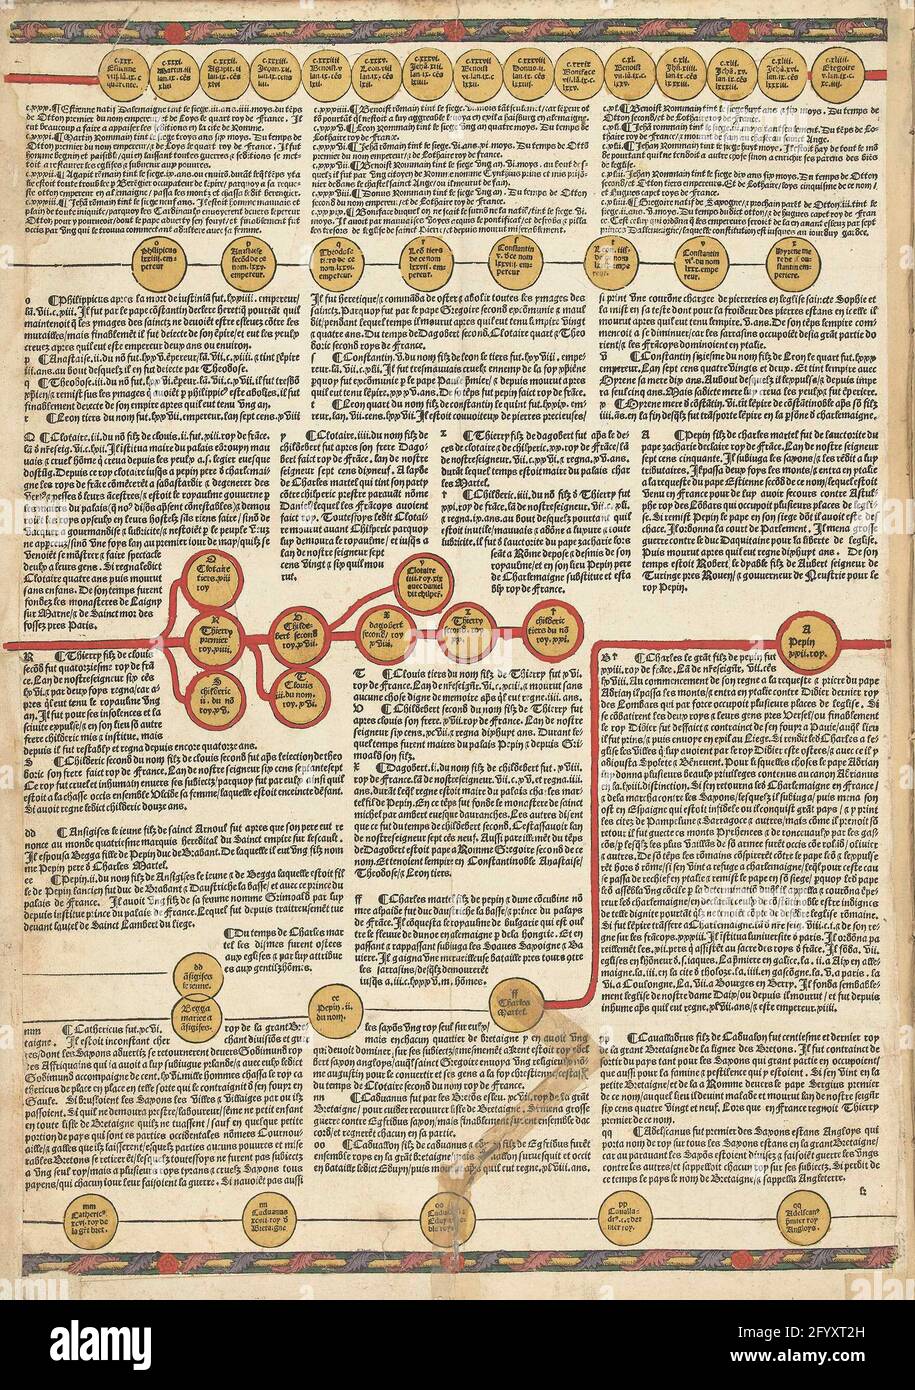 Cronica cronicarum (...), leaf 13 verso. Leaf 13 verso of a world bony. Text in bookpress in French in three columns. On the page circles filled with names: these together form a schematic representation of genealogy and precept succession, which extends over several pages of the chronicle. Stock Photo